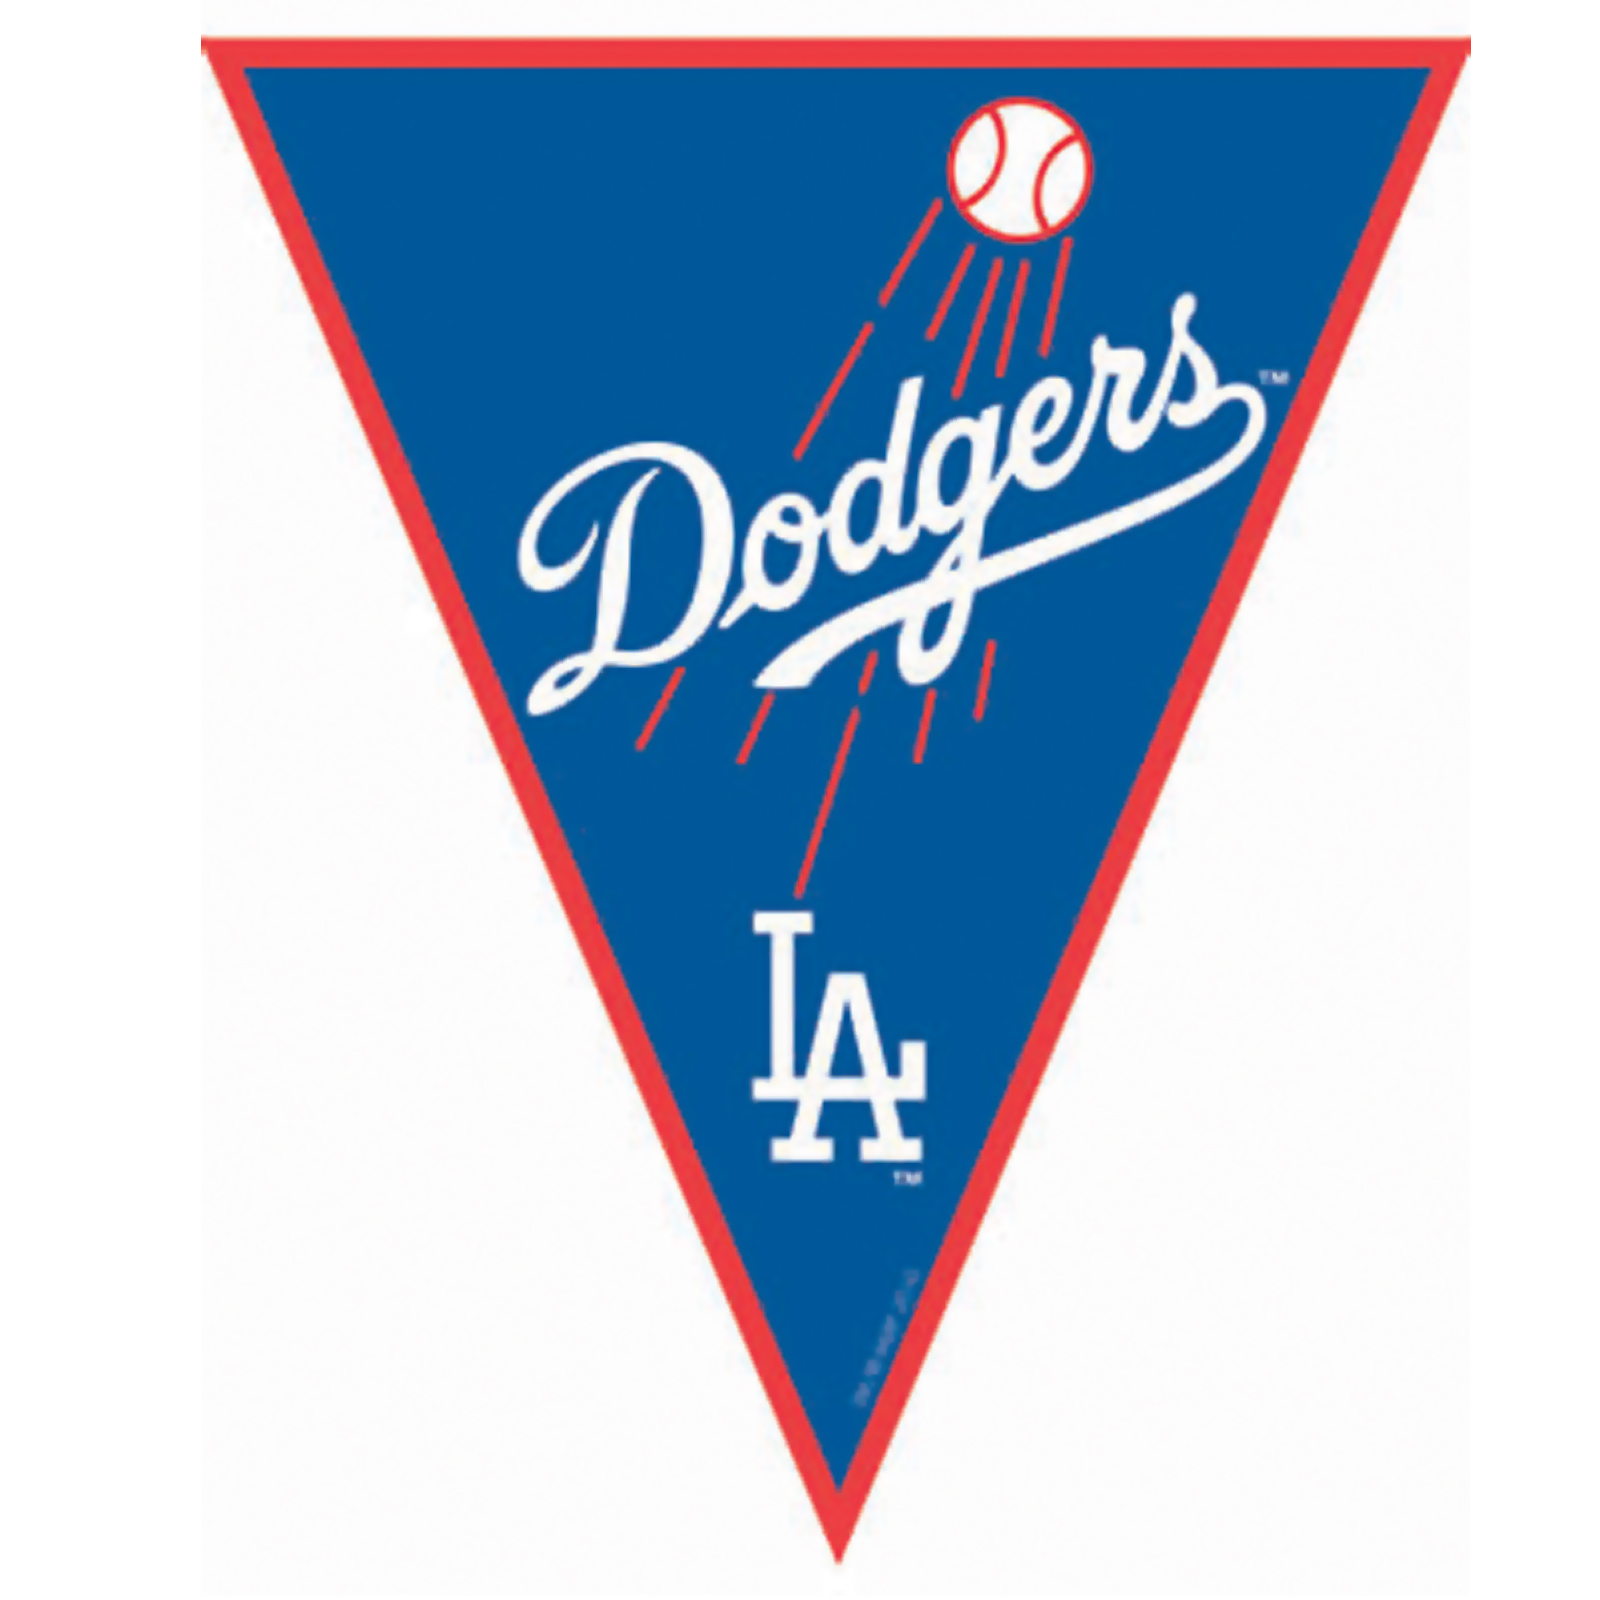 Brooklyn Los Angeles Dodgers transparent background PNG cliparts